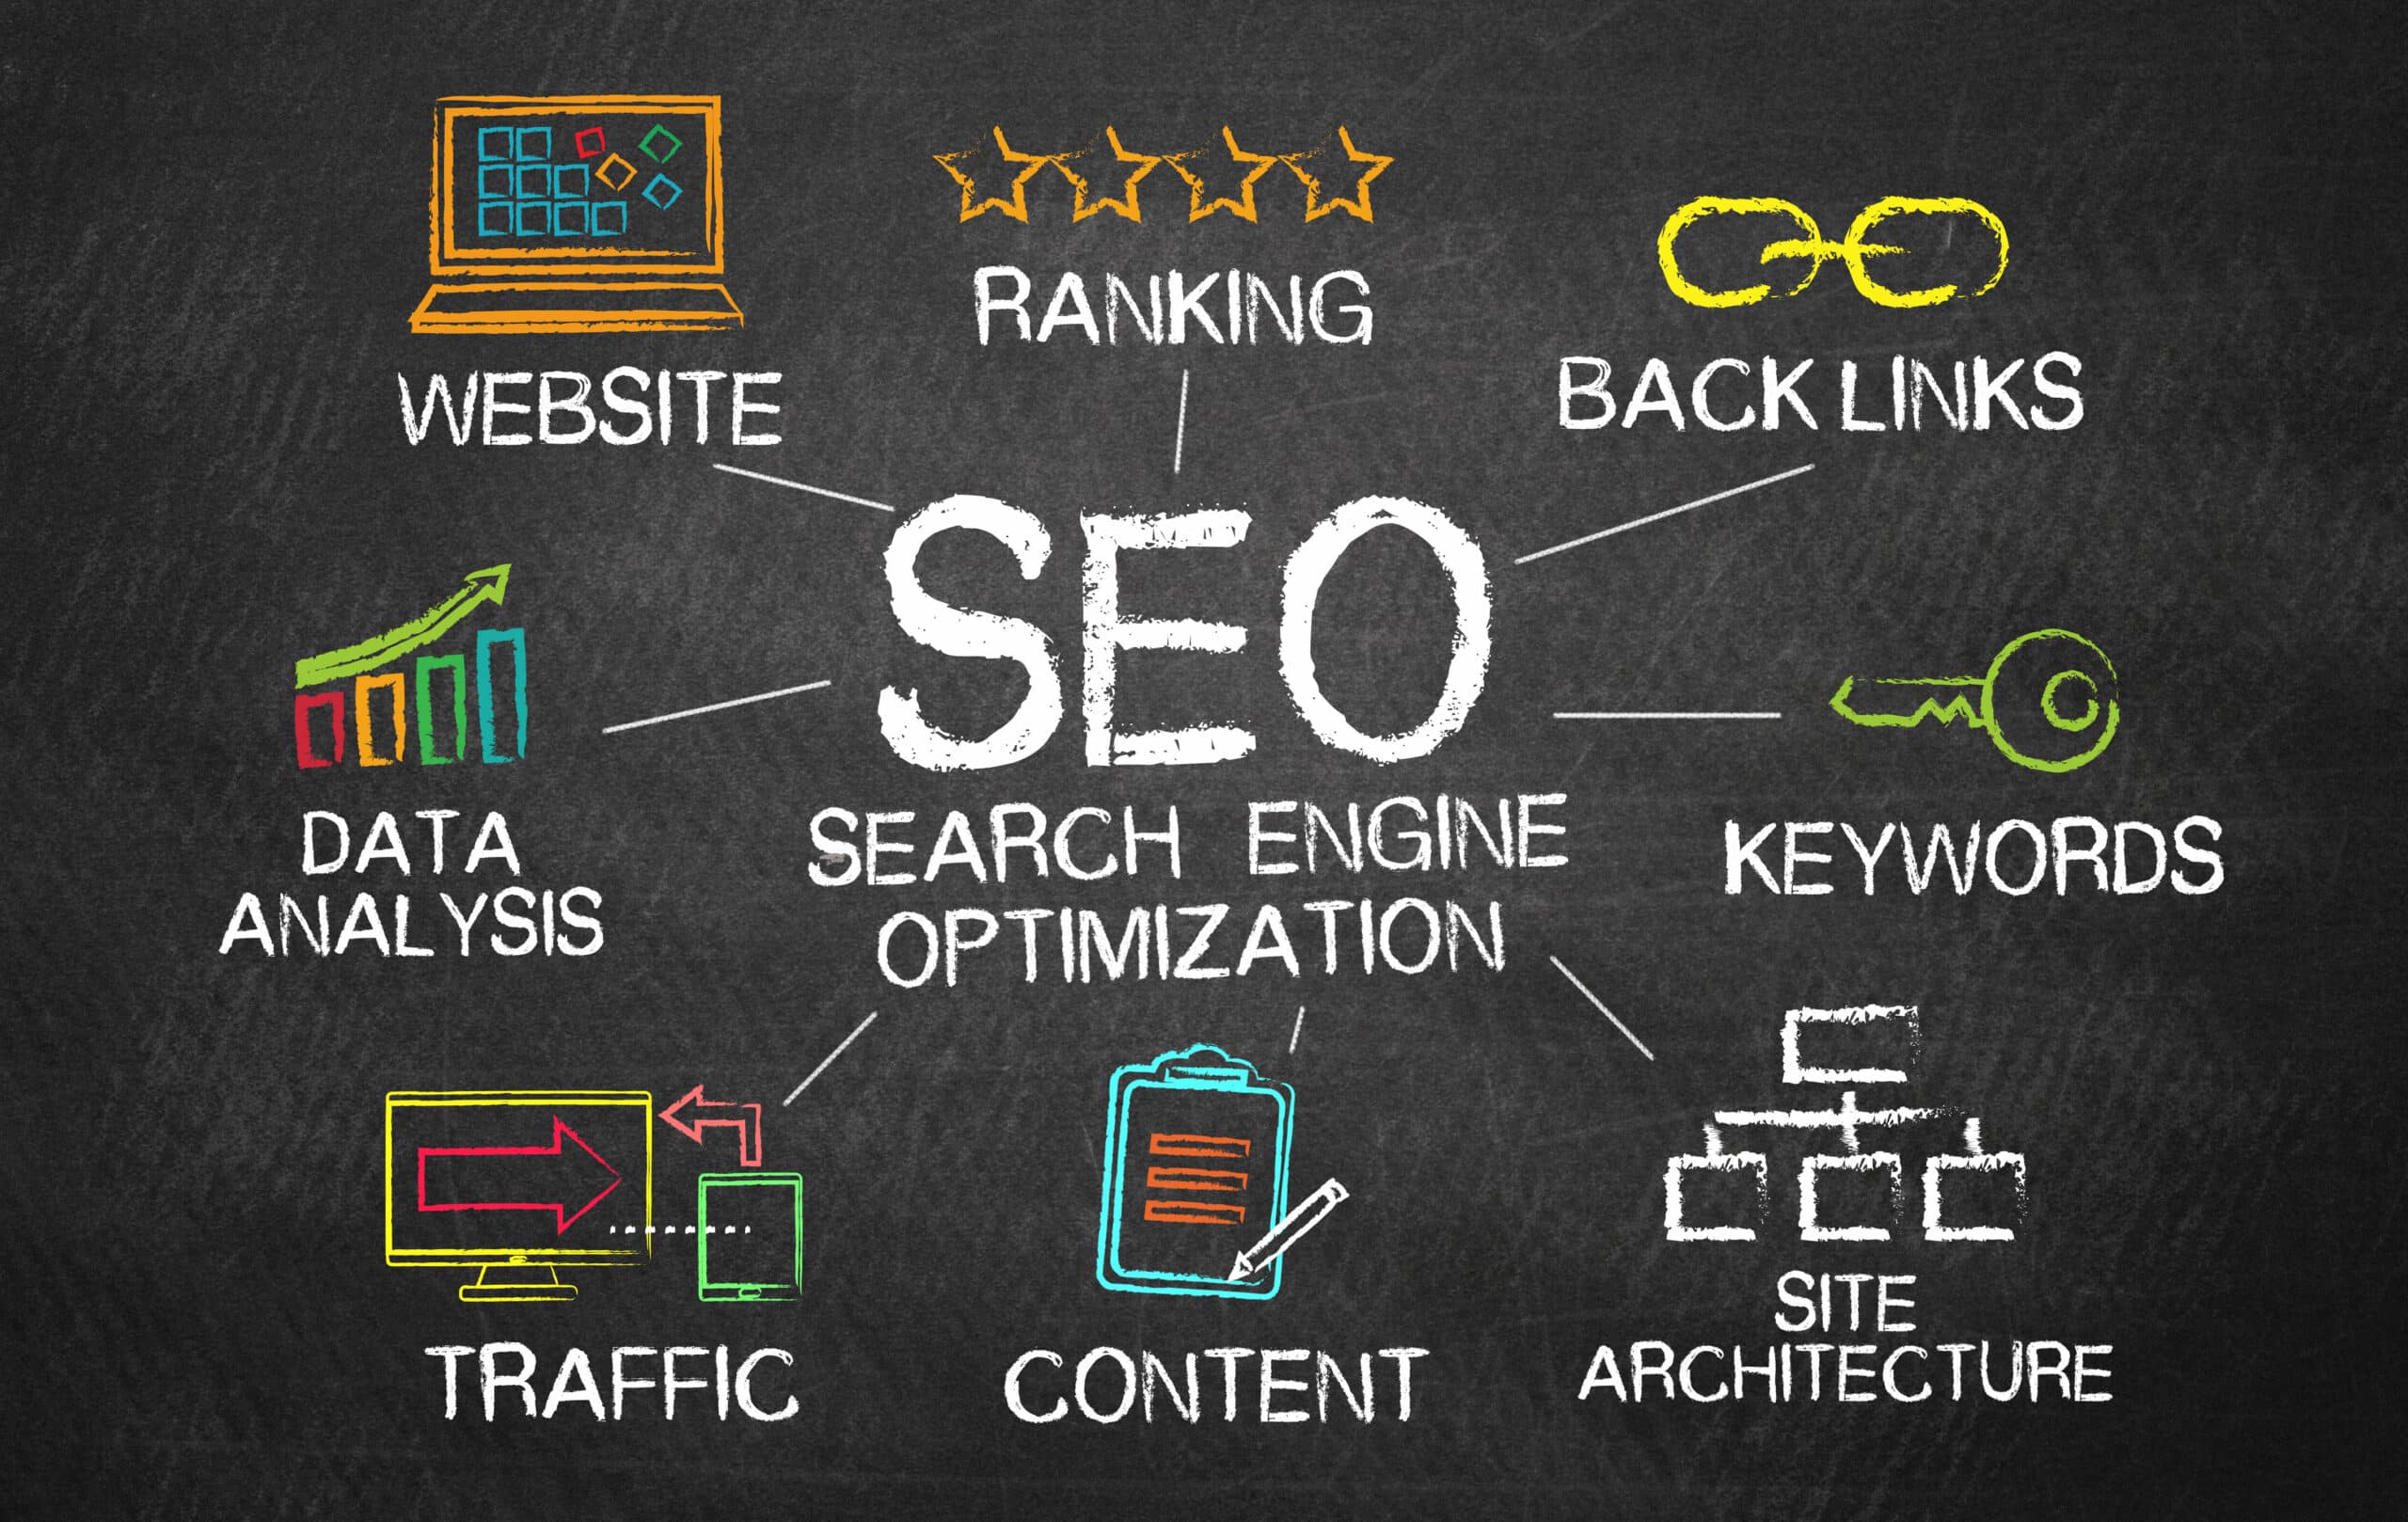 What is SEO (search engine optimization)